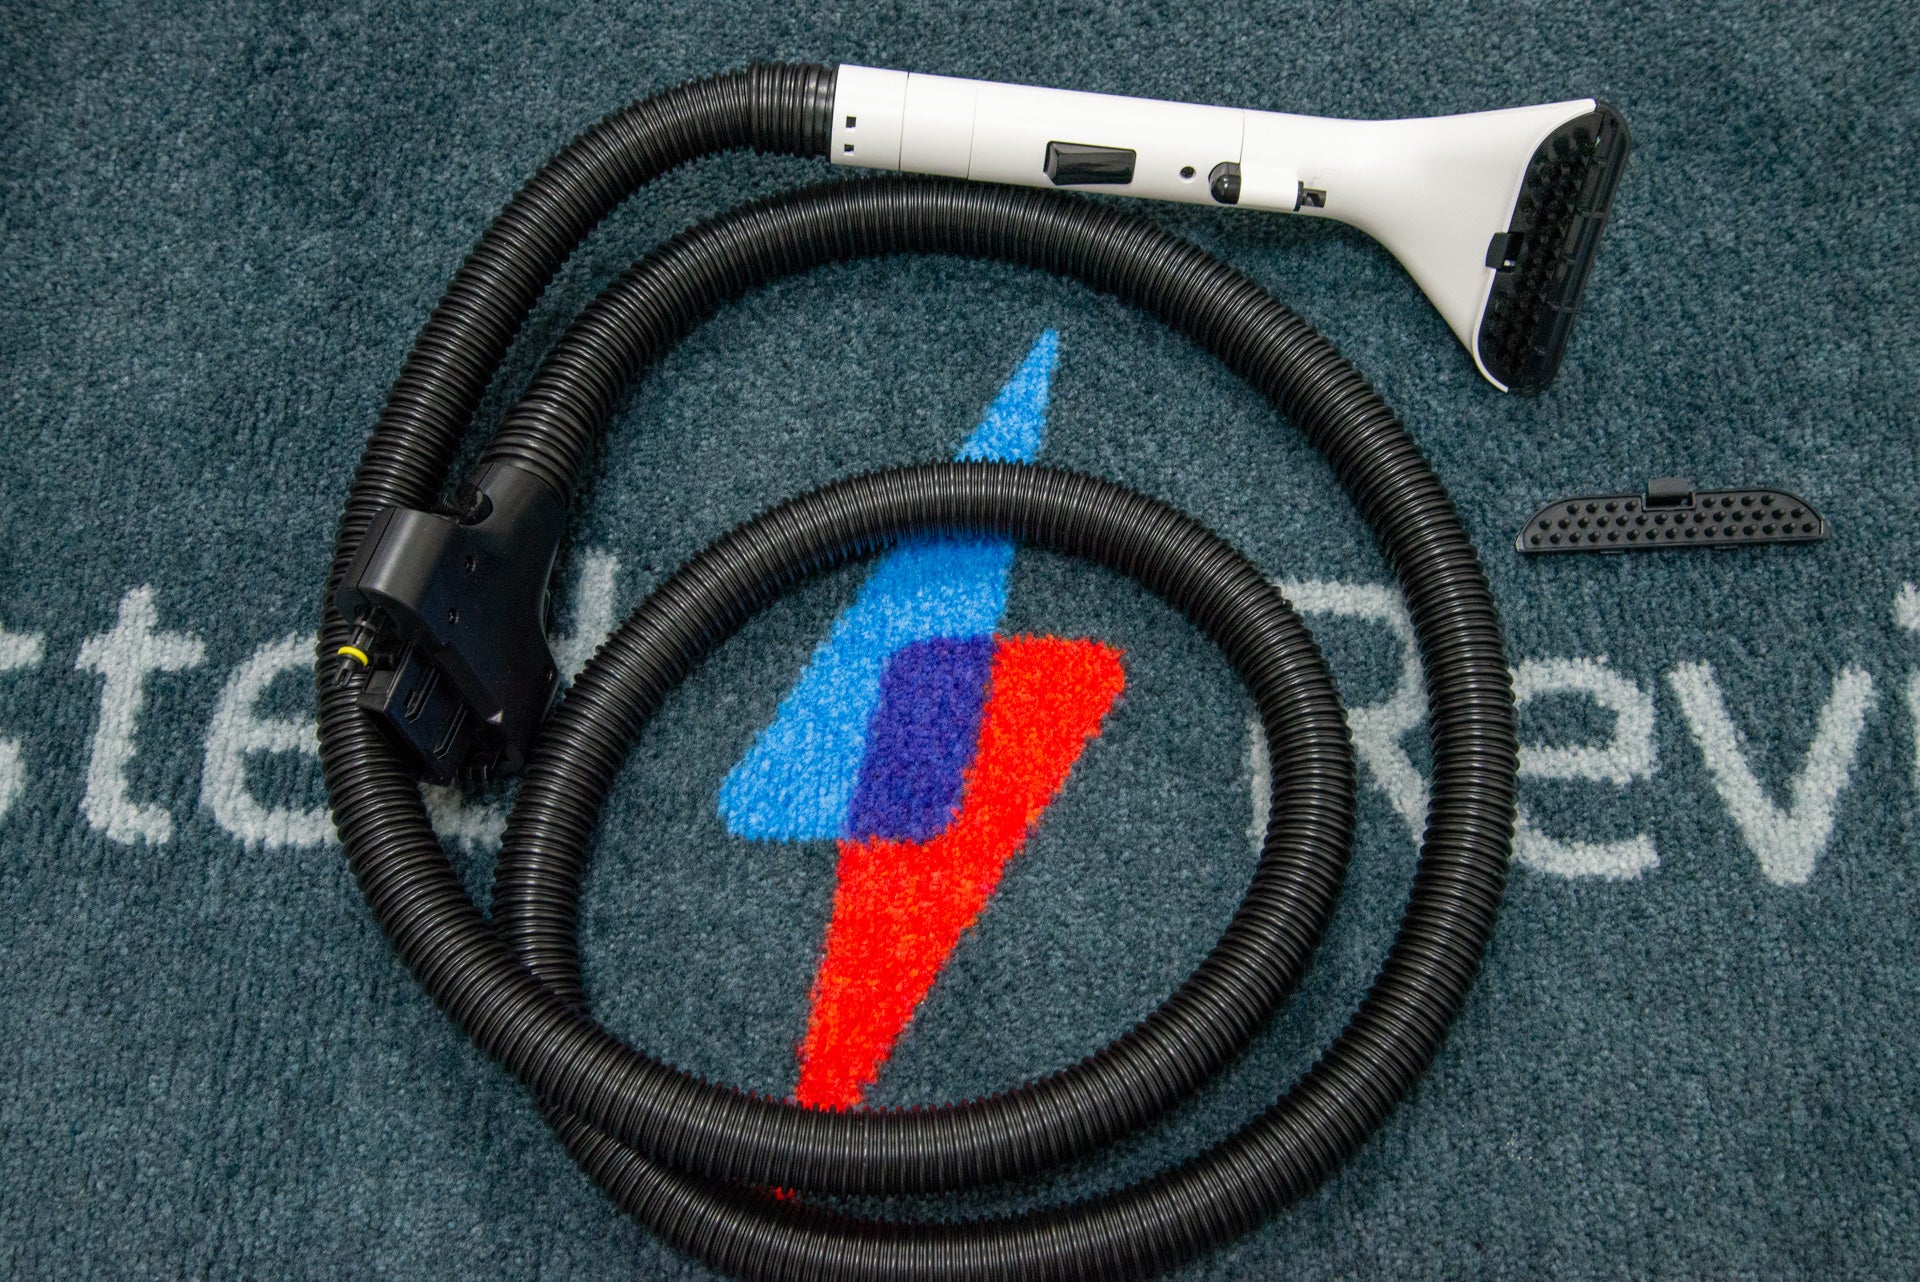 The Tineco Carpet One Pro's hose and detail brush